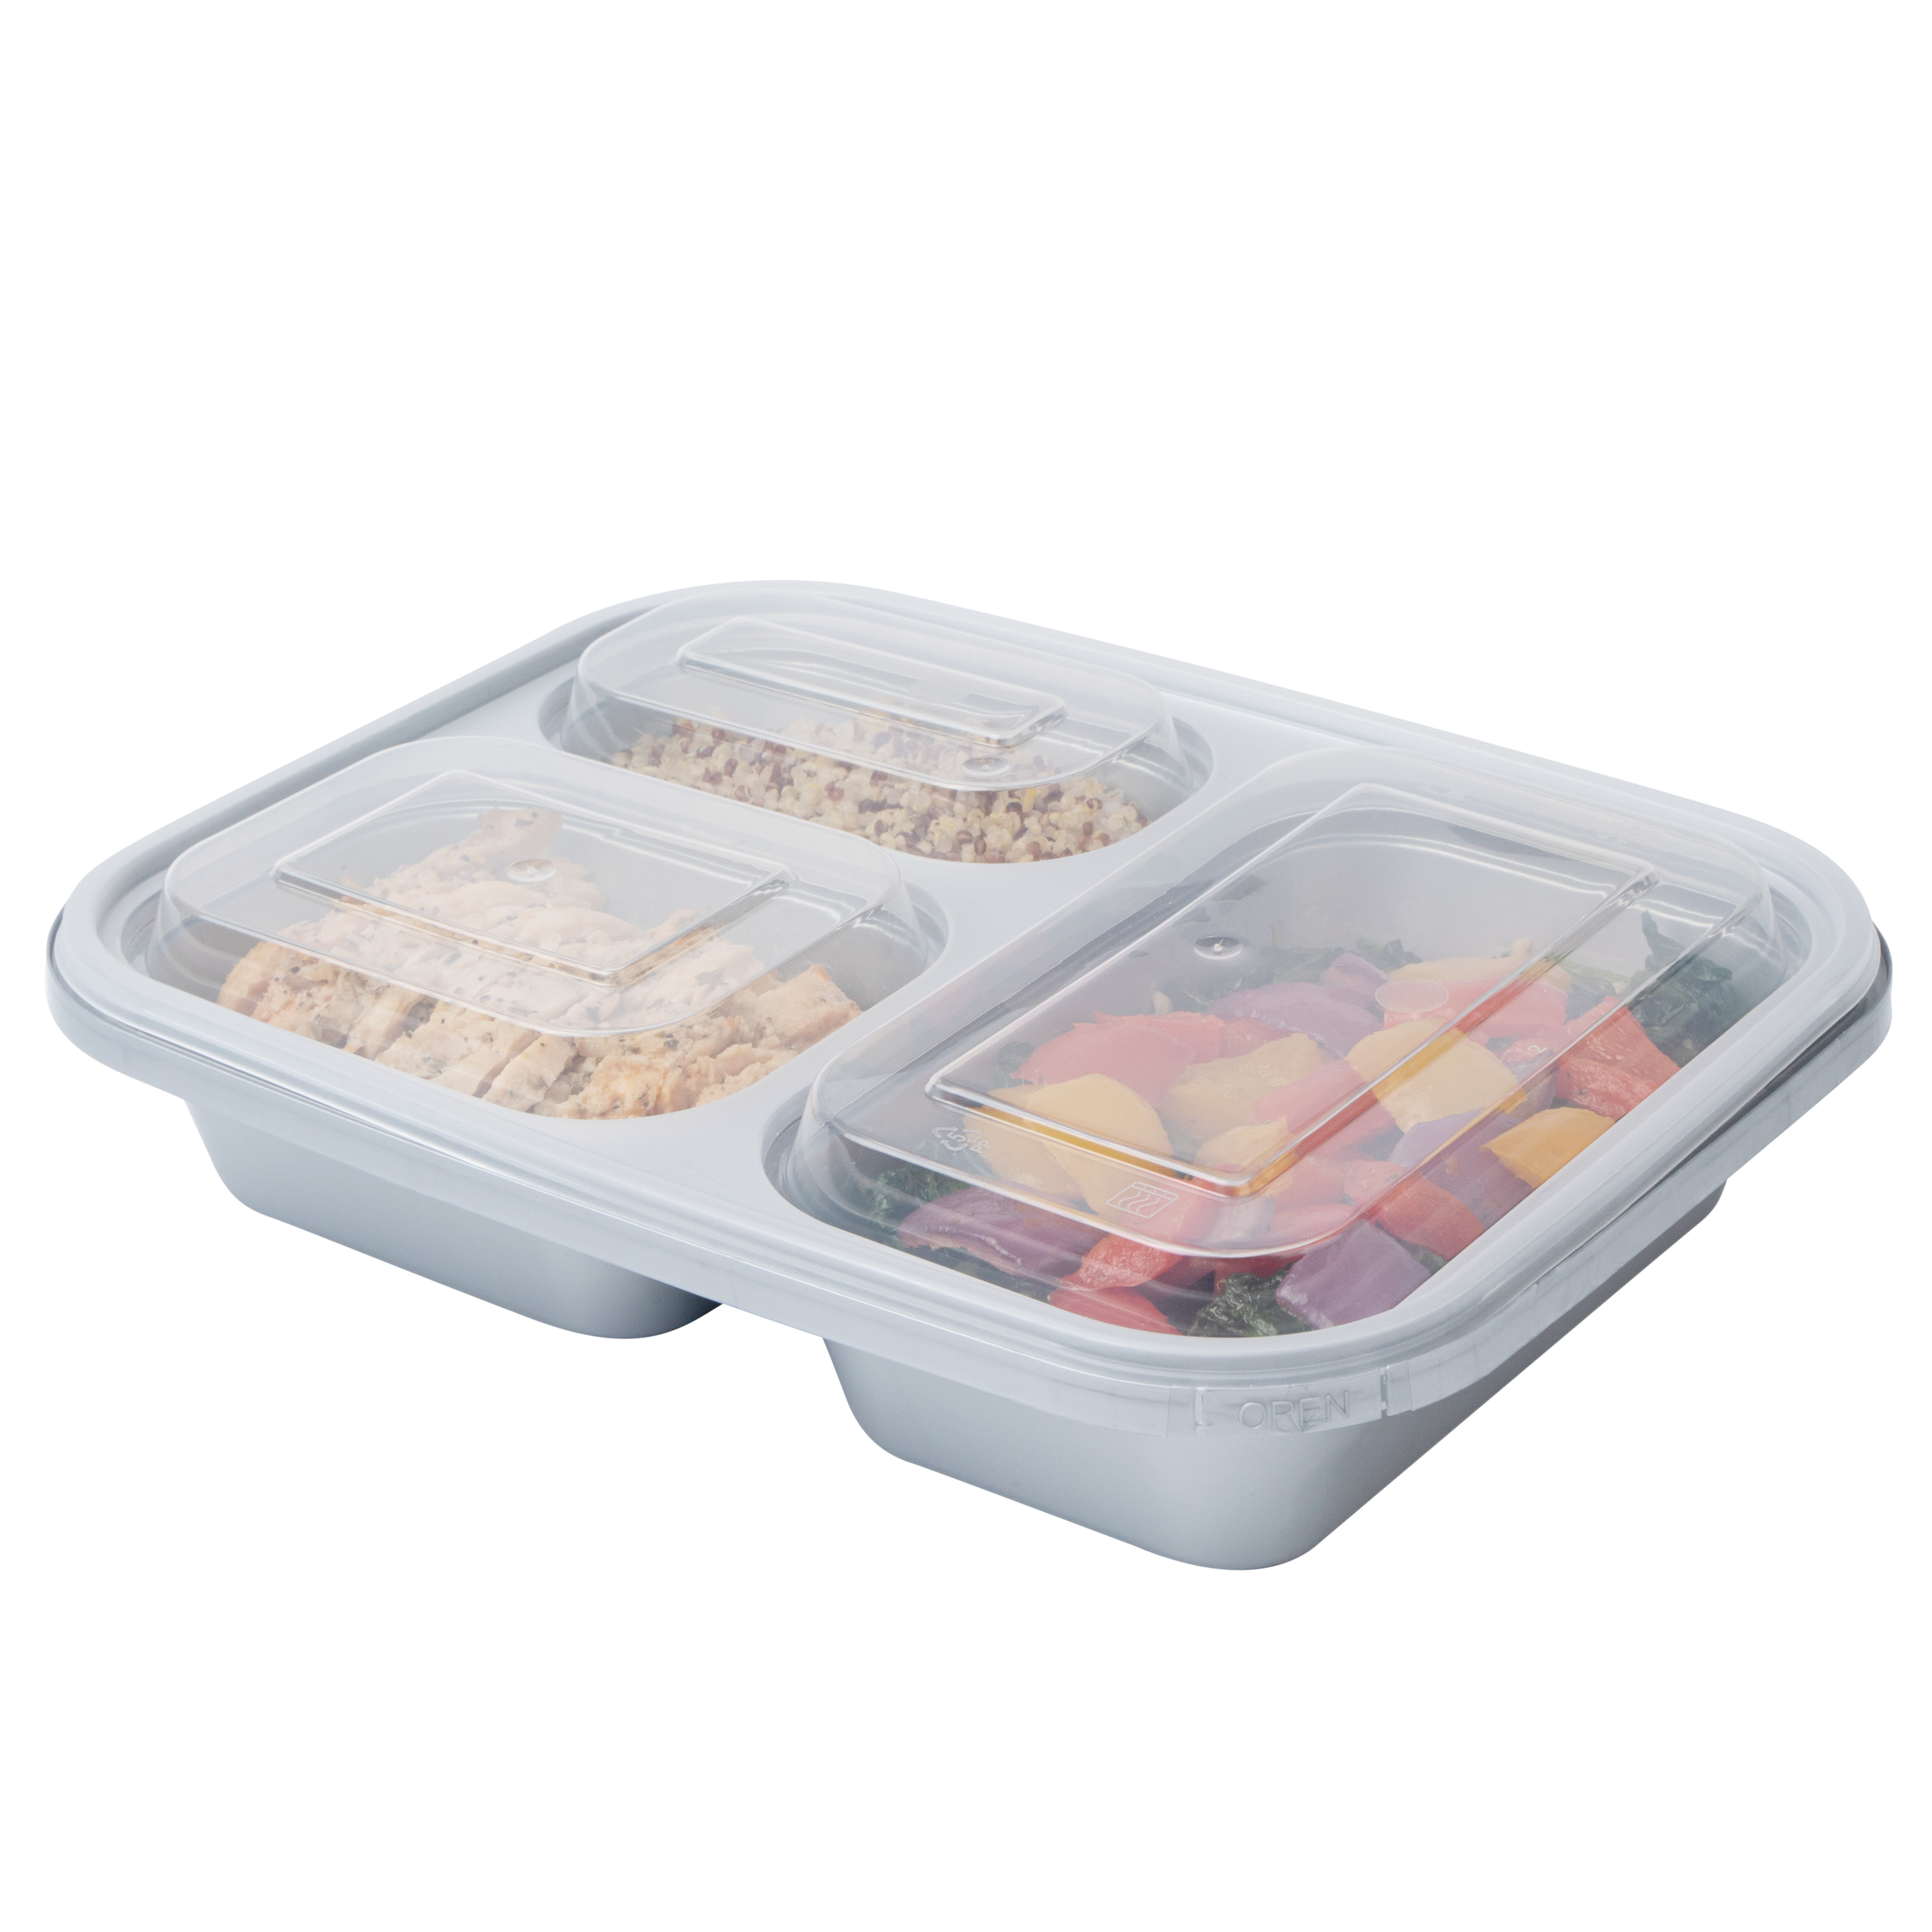 Restaurantware Futura 32 Ounce Meal Prep Containers with Lids, 100 Microwavable to Go Containers - Insert Sold Separately, Disposable, Silver